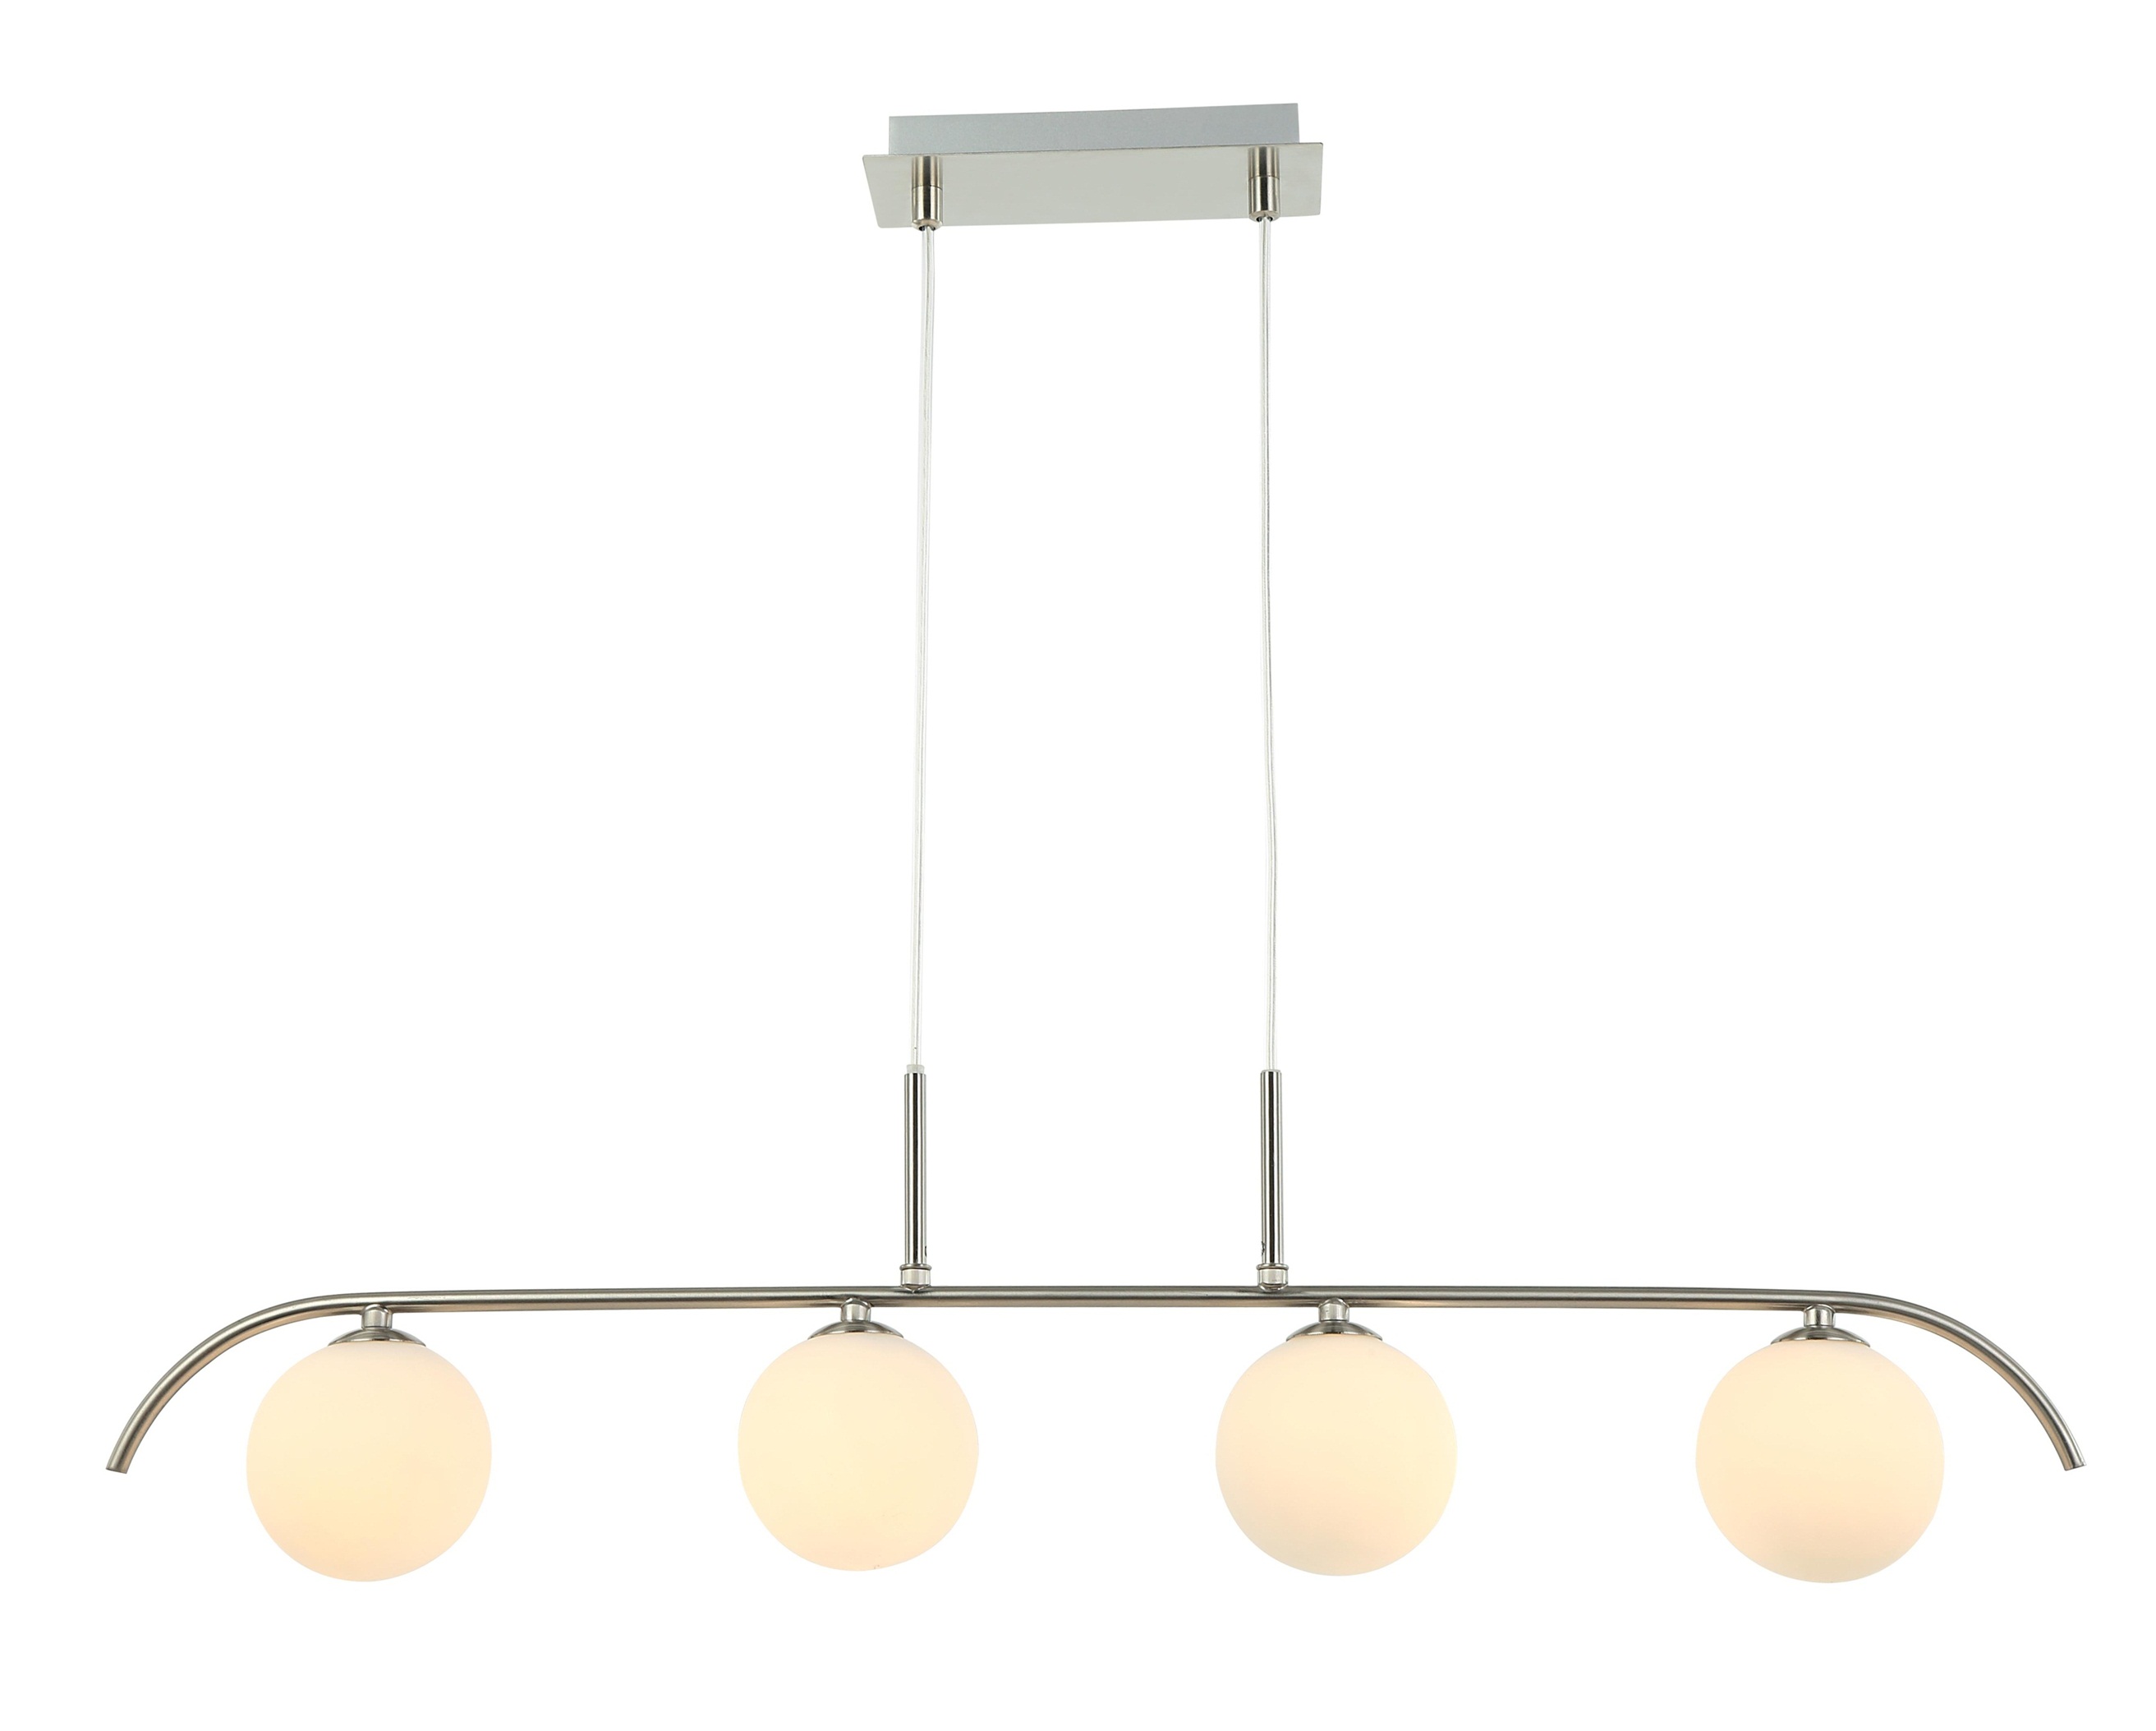 Saintly industry-leading modern led chandeliers supply for dining room-1